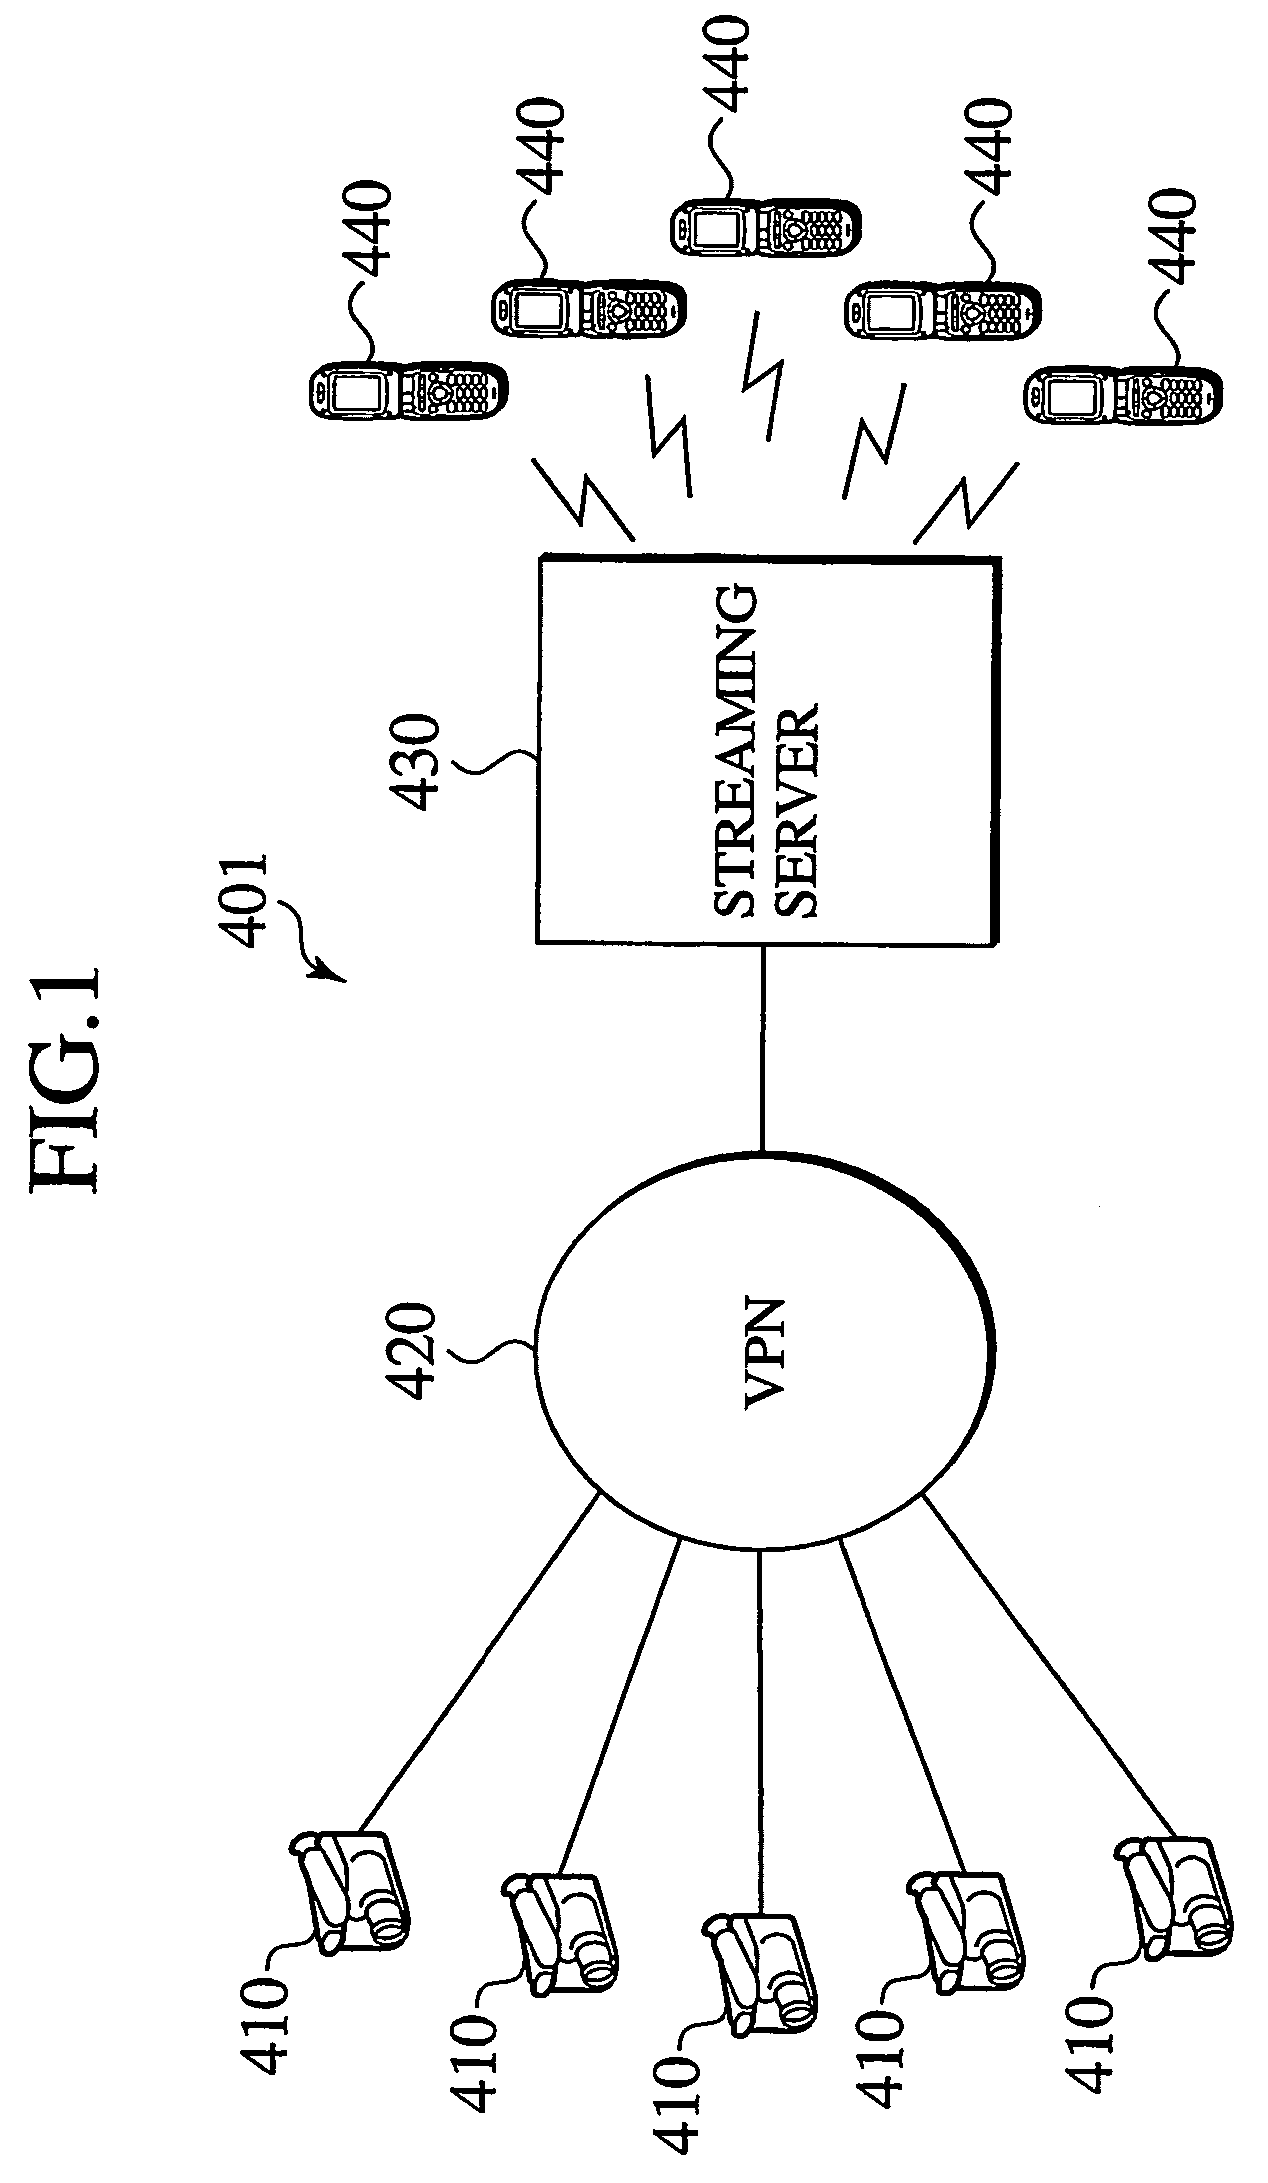 Communication system and transfer device